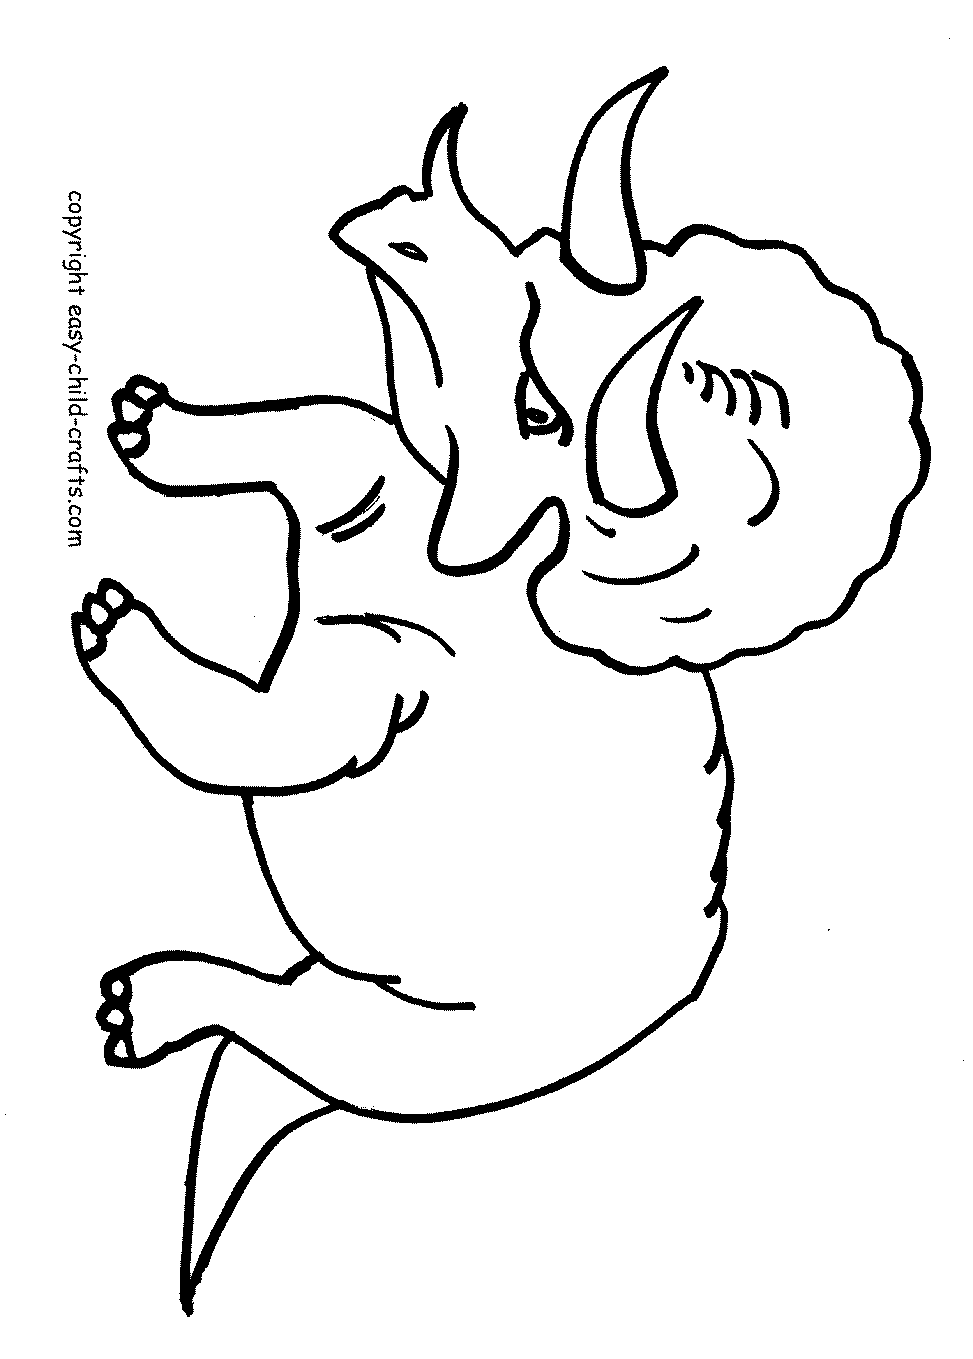 dinosaur coloring pages for toddlers extinct animals 36 printable dinosaur coloring pages for pages coloring toddlers dinosaur 